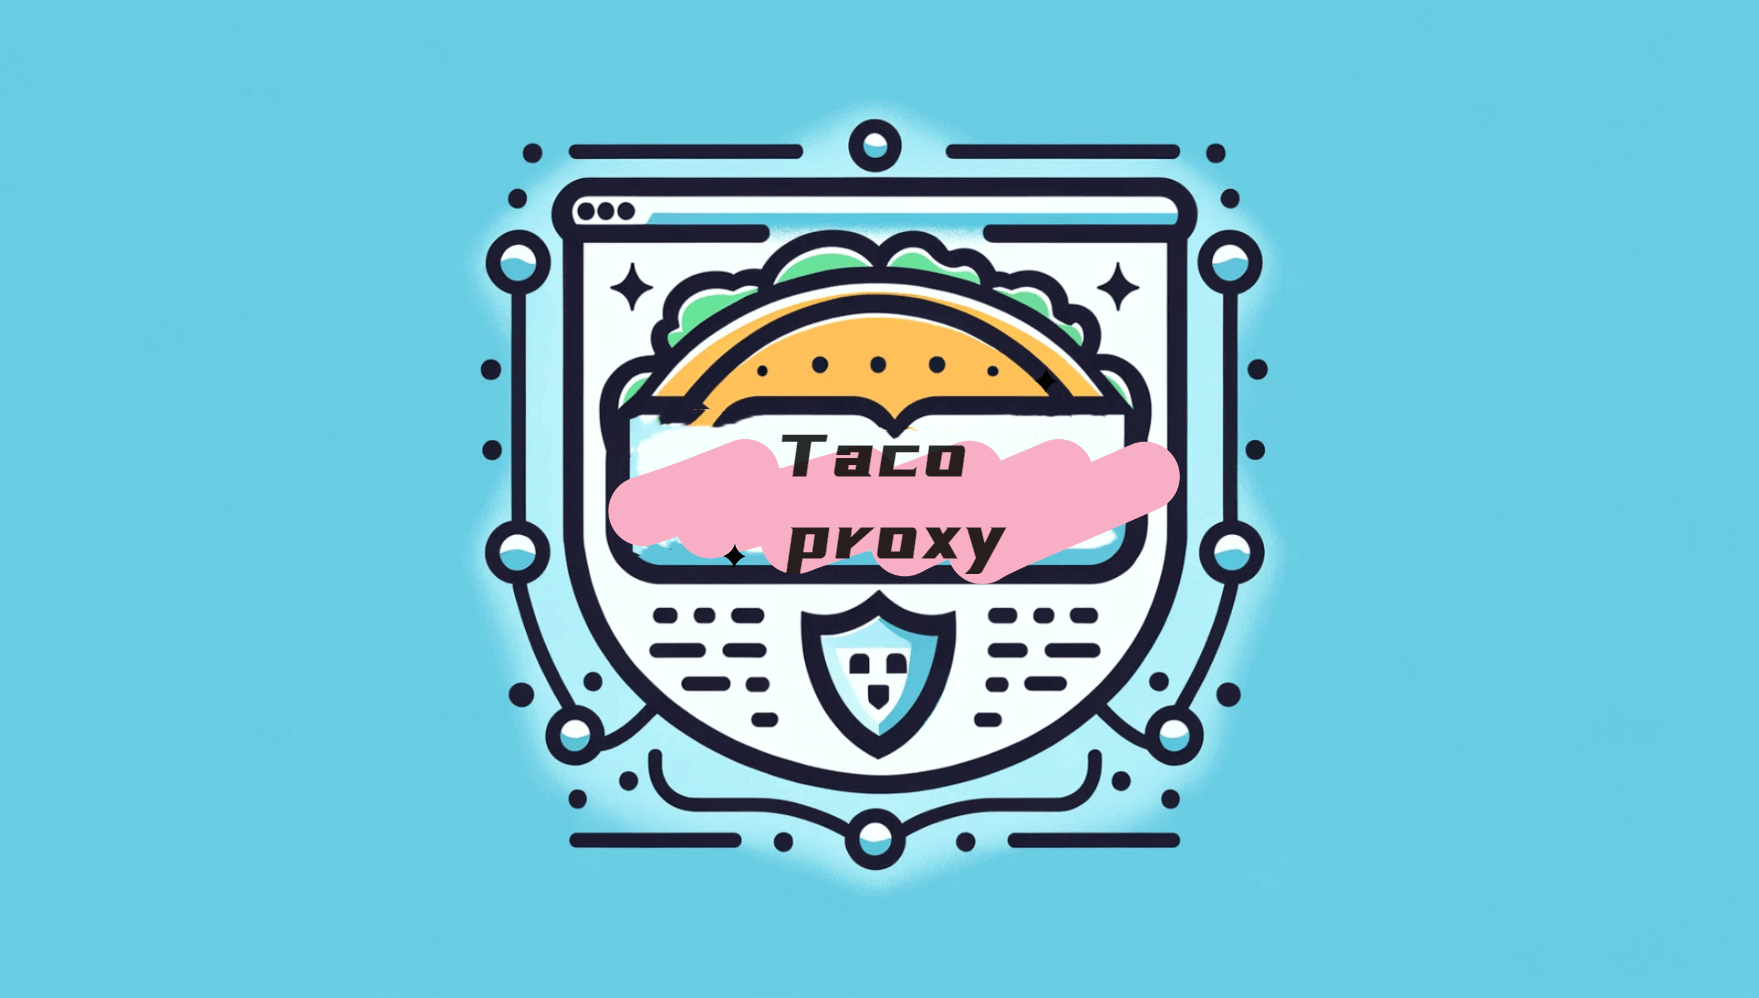 What Is Taco proxy